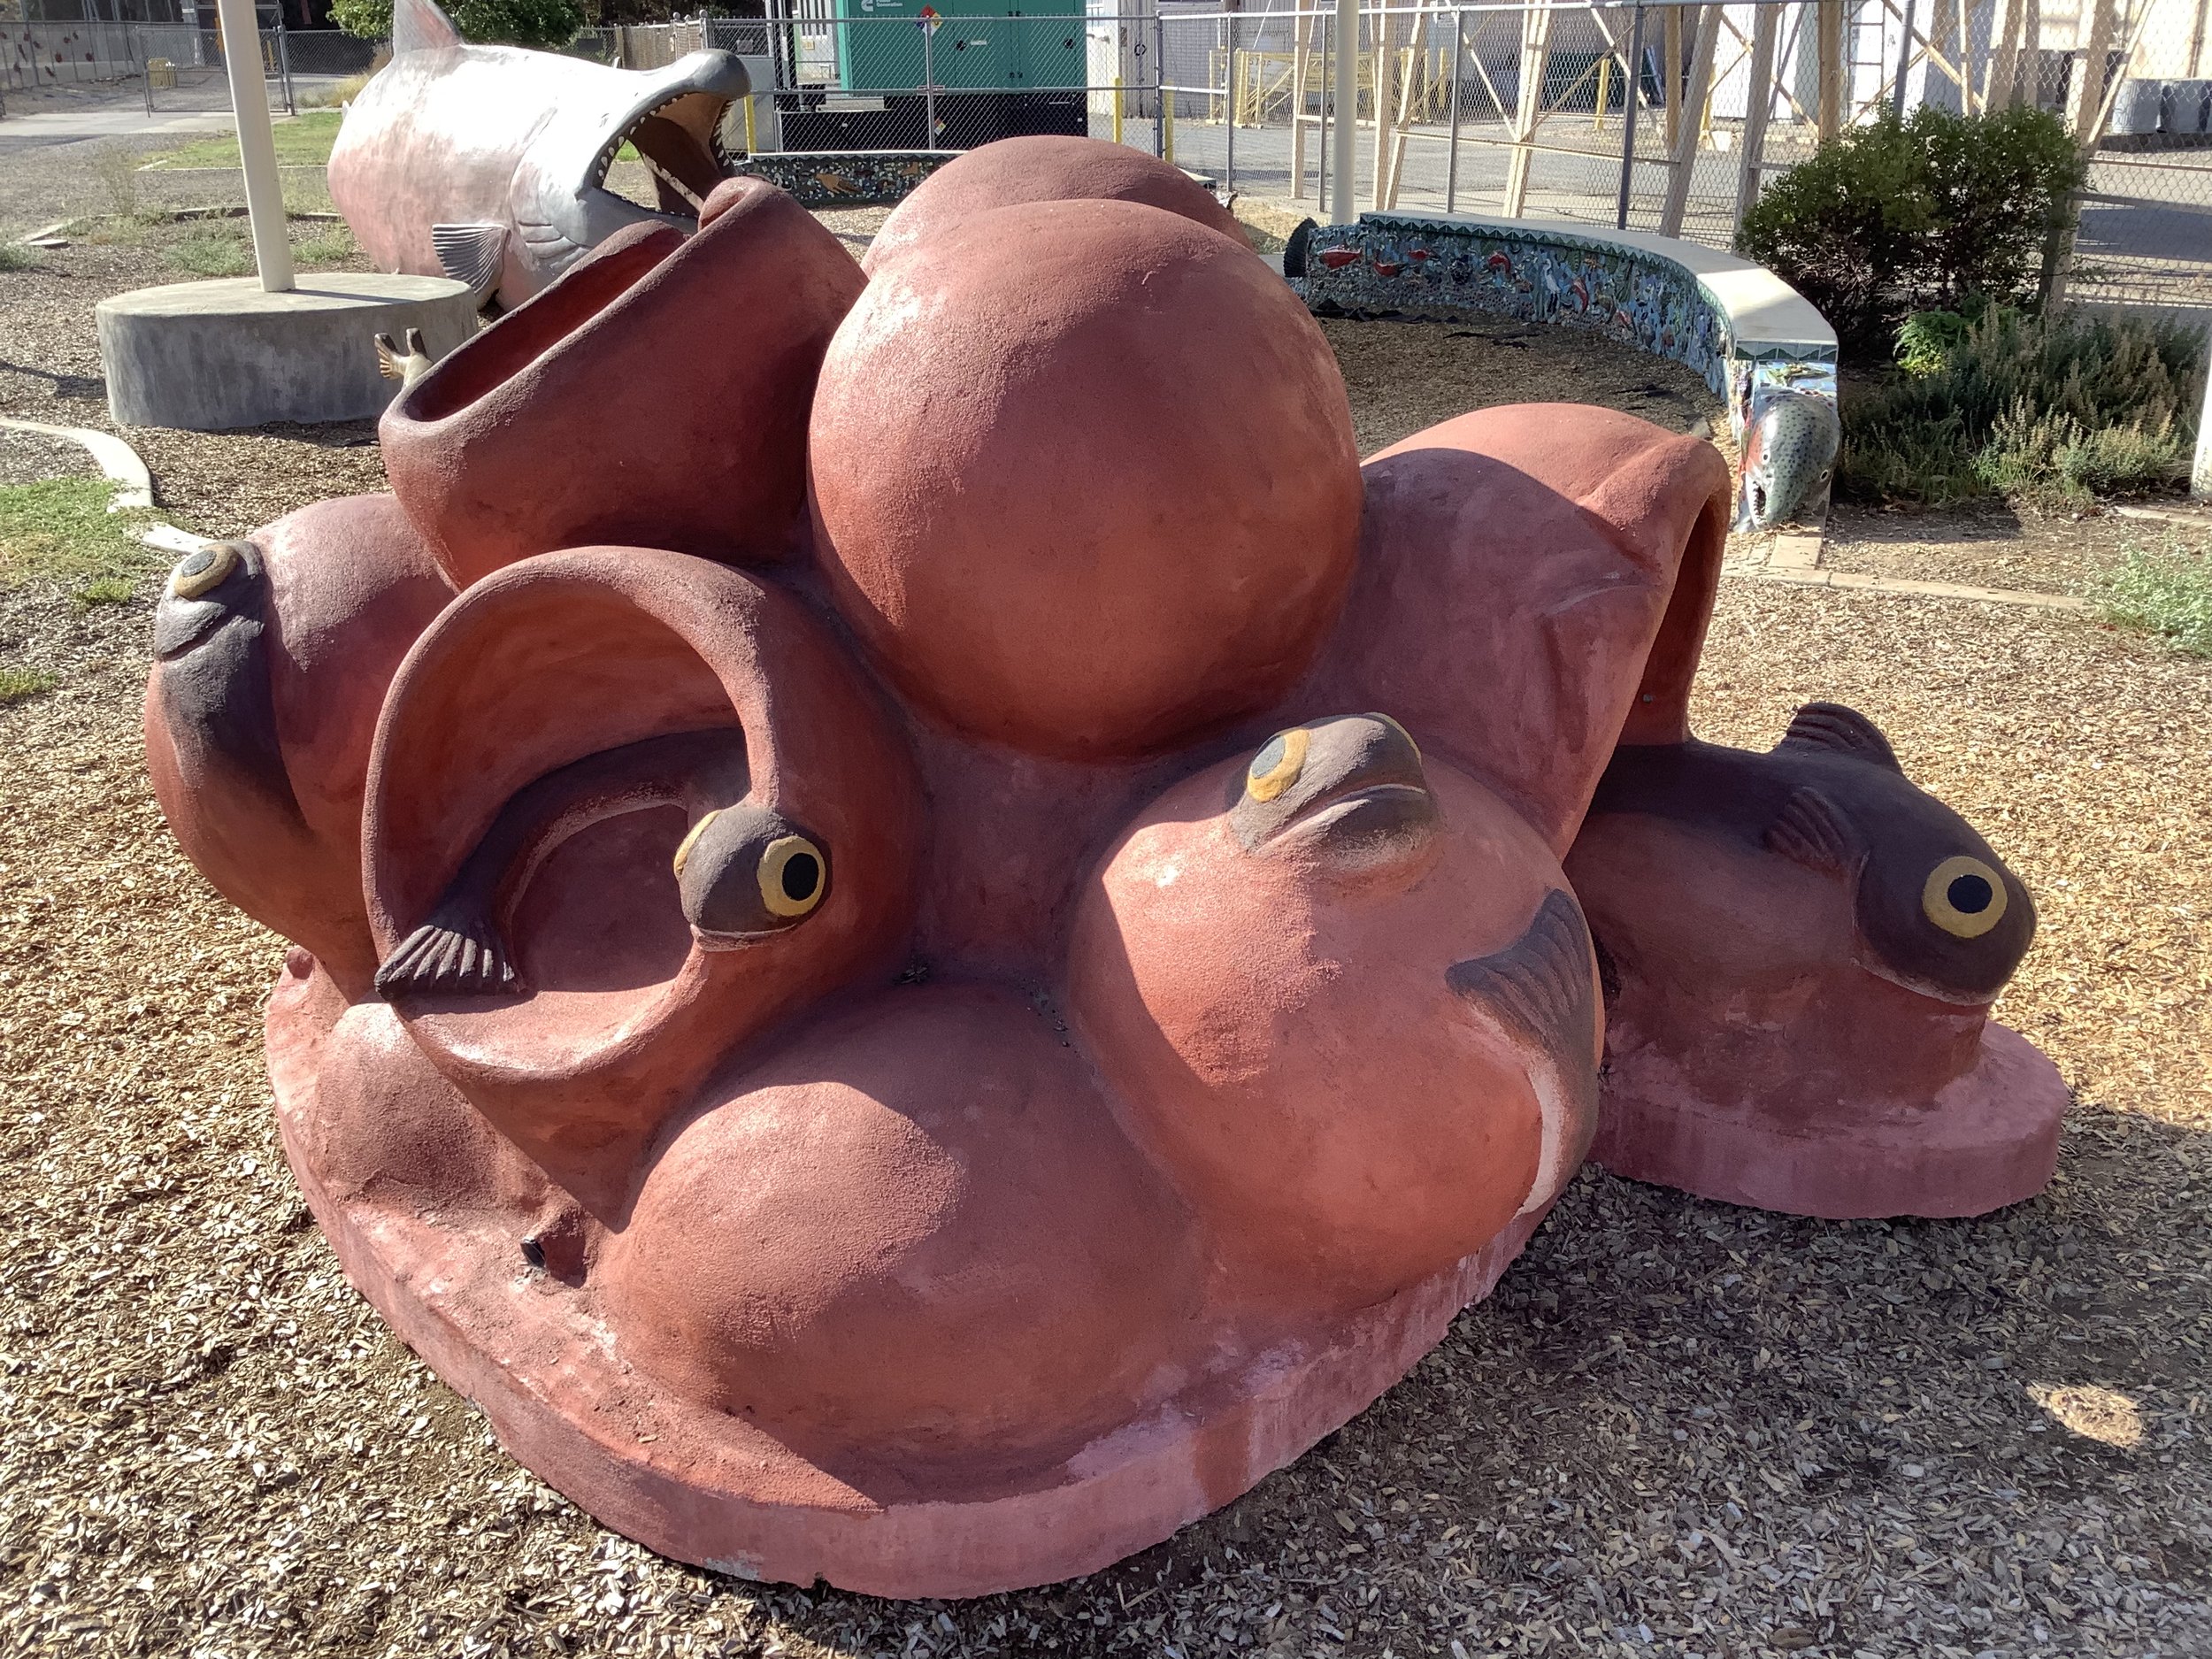  A Playscape sculpture made for nimbus fish hatchery in Gold River, CA  